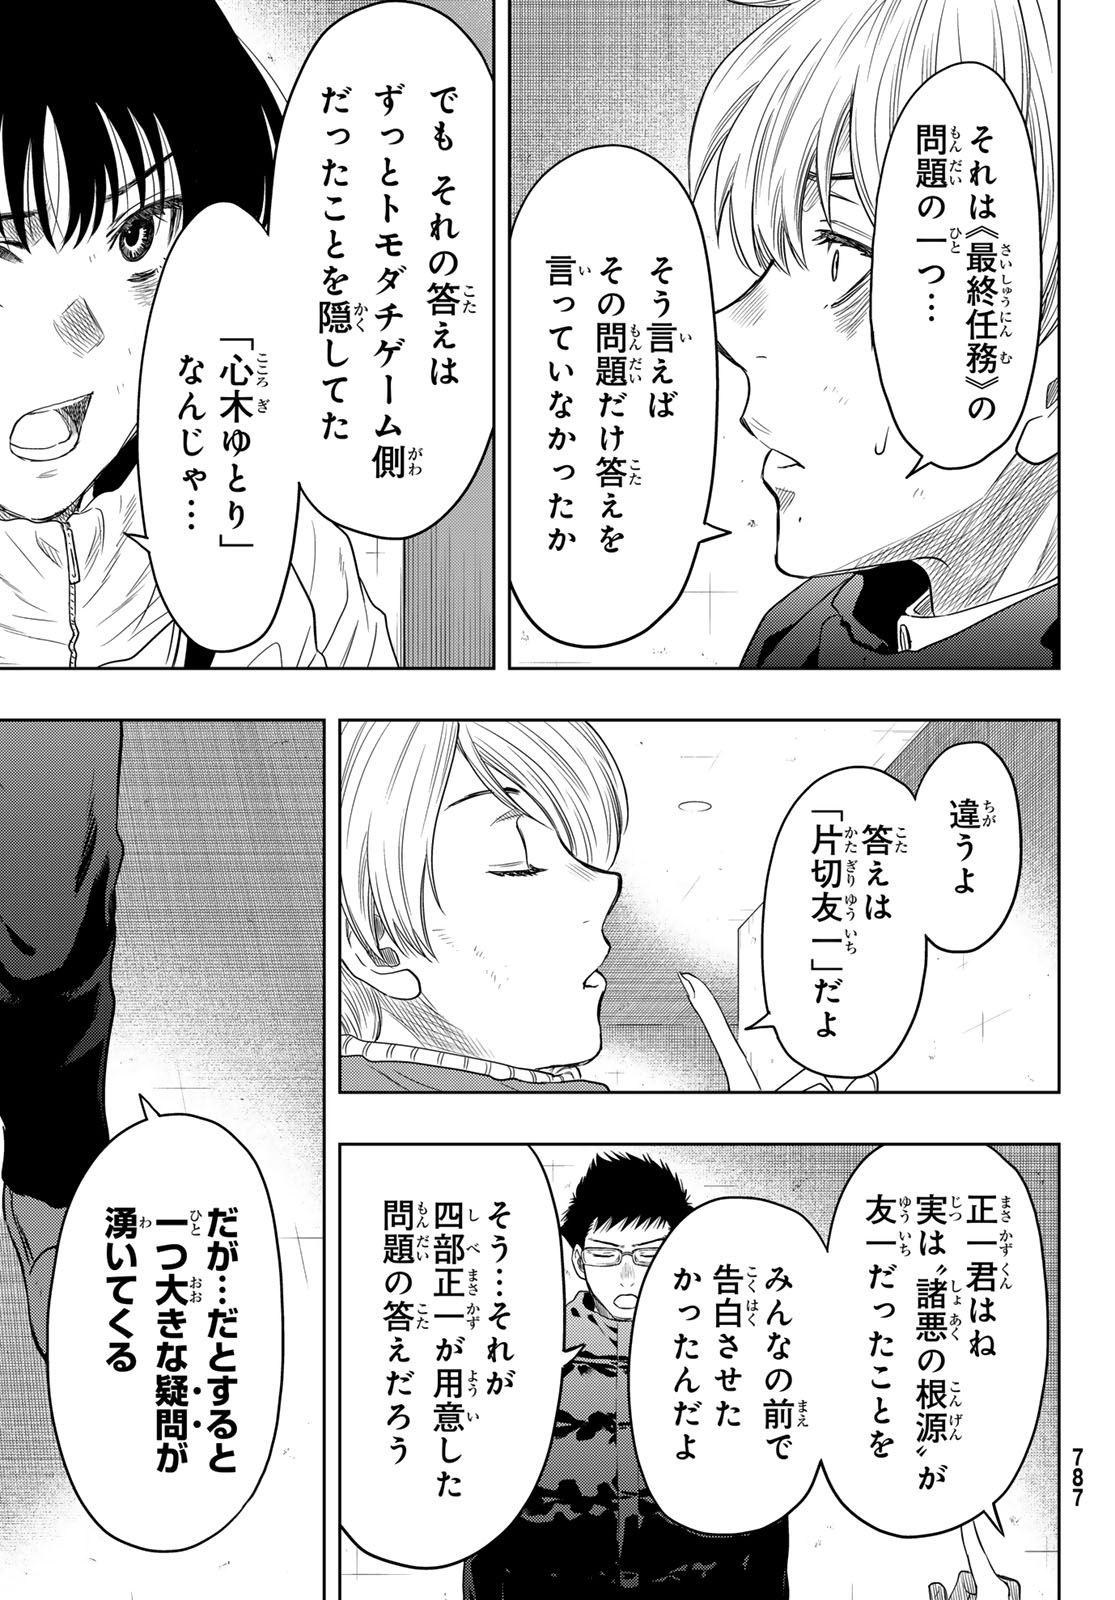 Tomodachi Game (Friends Games) - Chapter 126 - Page 29